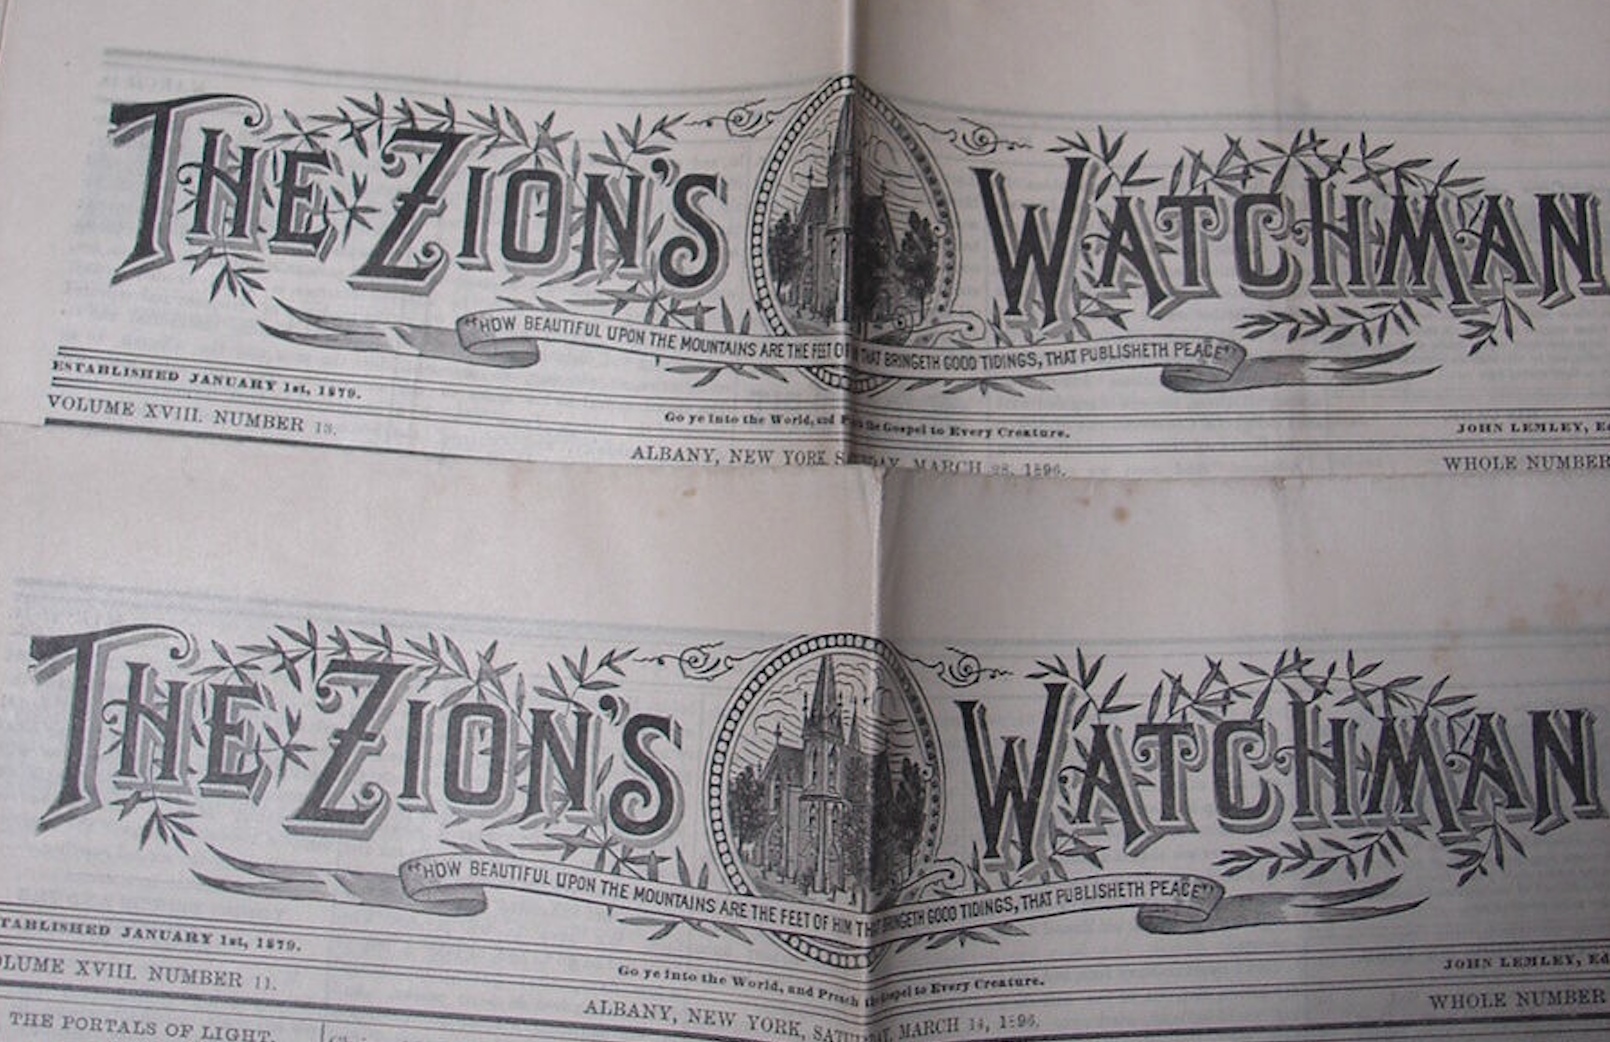 An issue of the antislavery newspaper Zion's Watchman